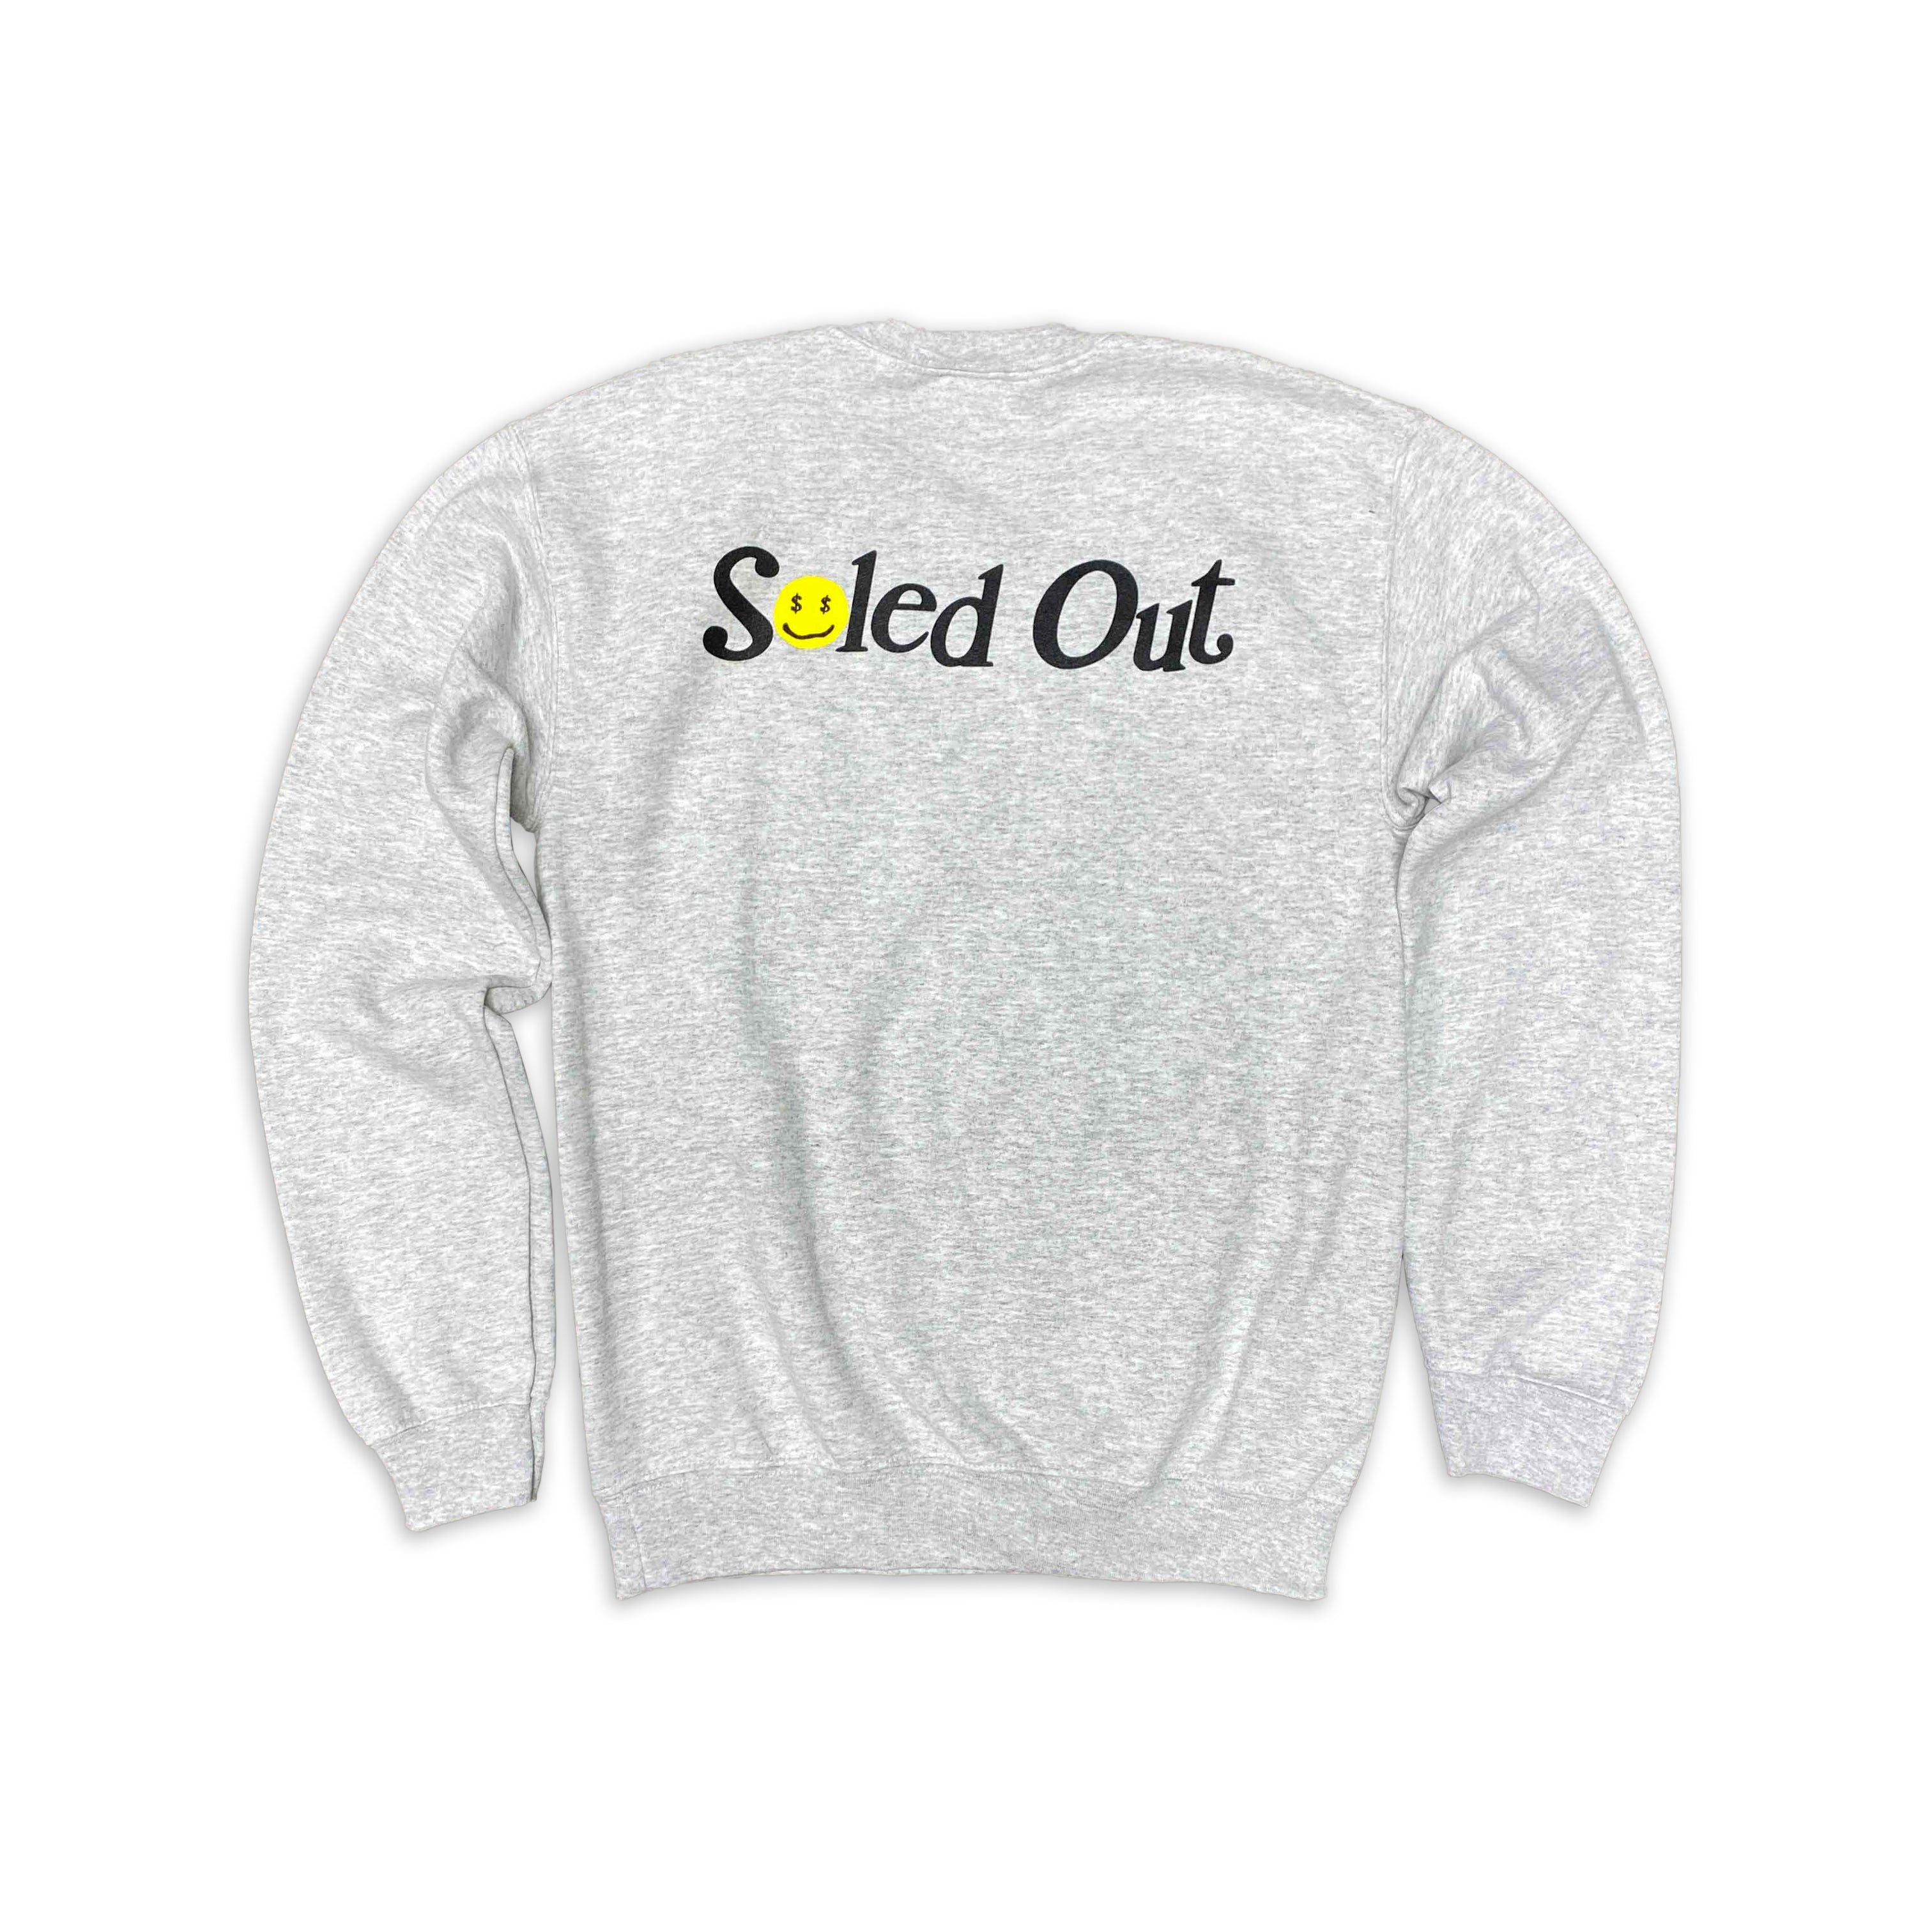 Soled Out Crewneck Sweater "EXPENSIVE" Ash New Size S